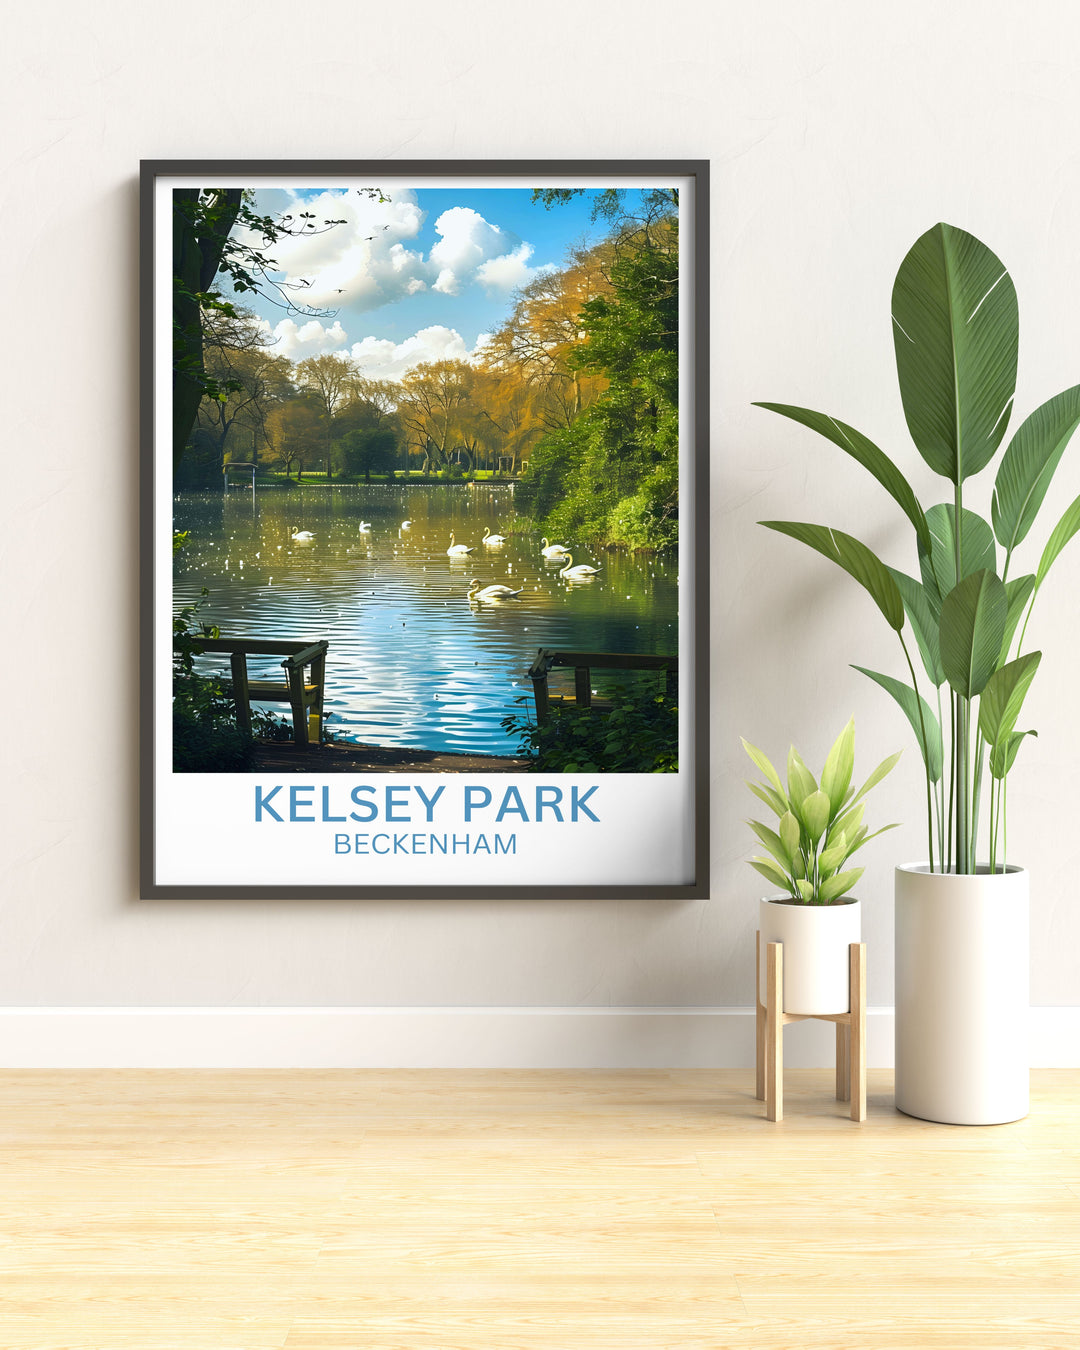 Framed print of Beckenham showing the historic manor and public greens vibrant with natural beauty and cultural heritage